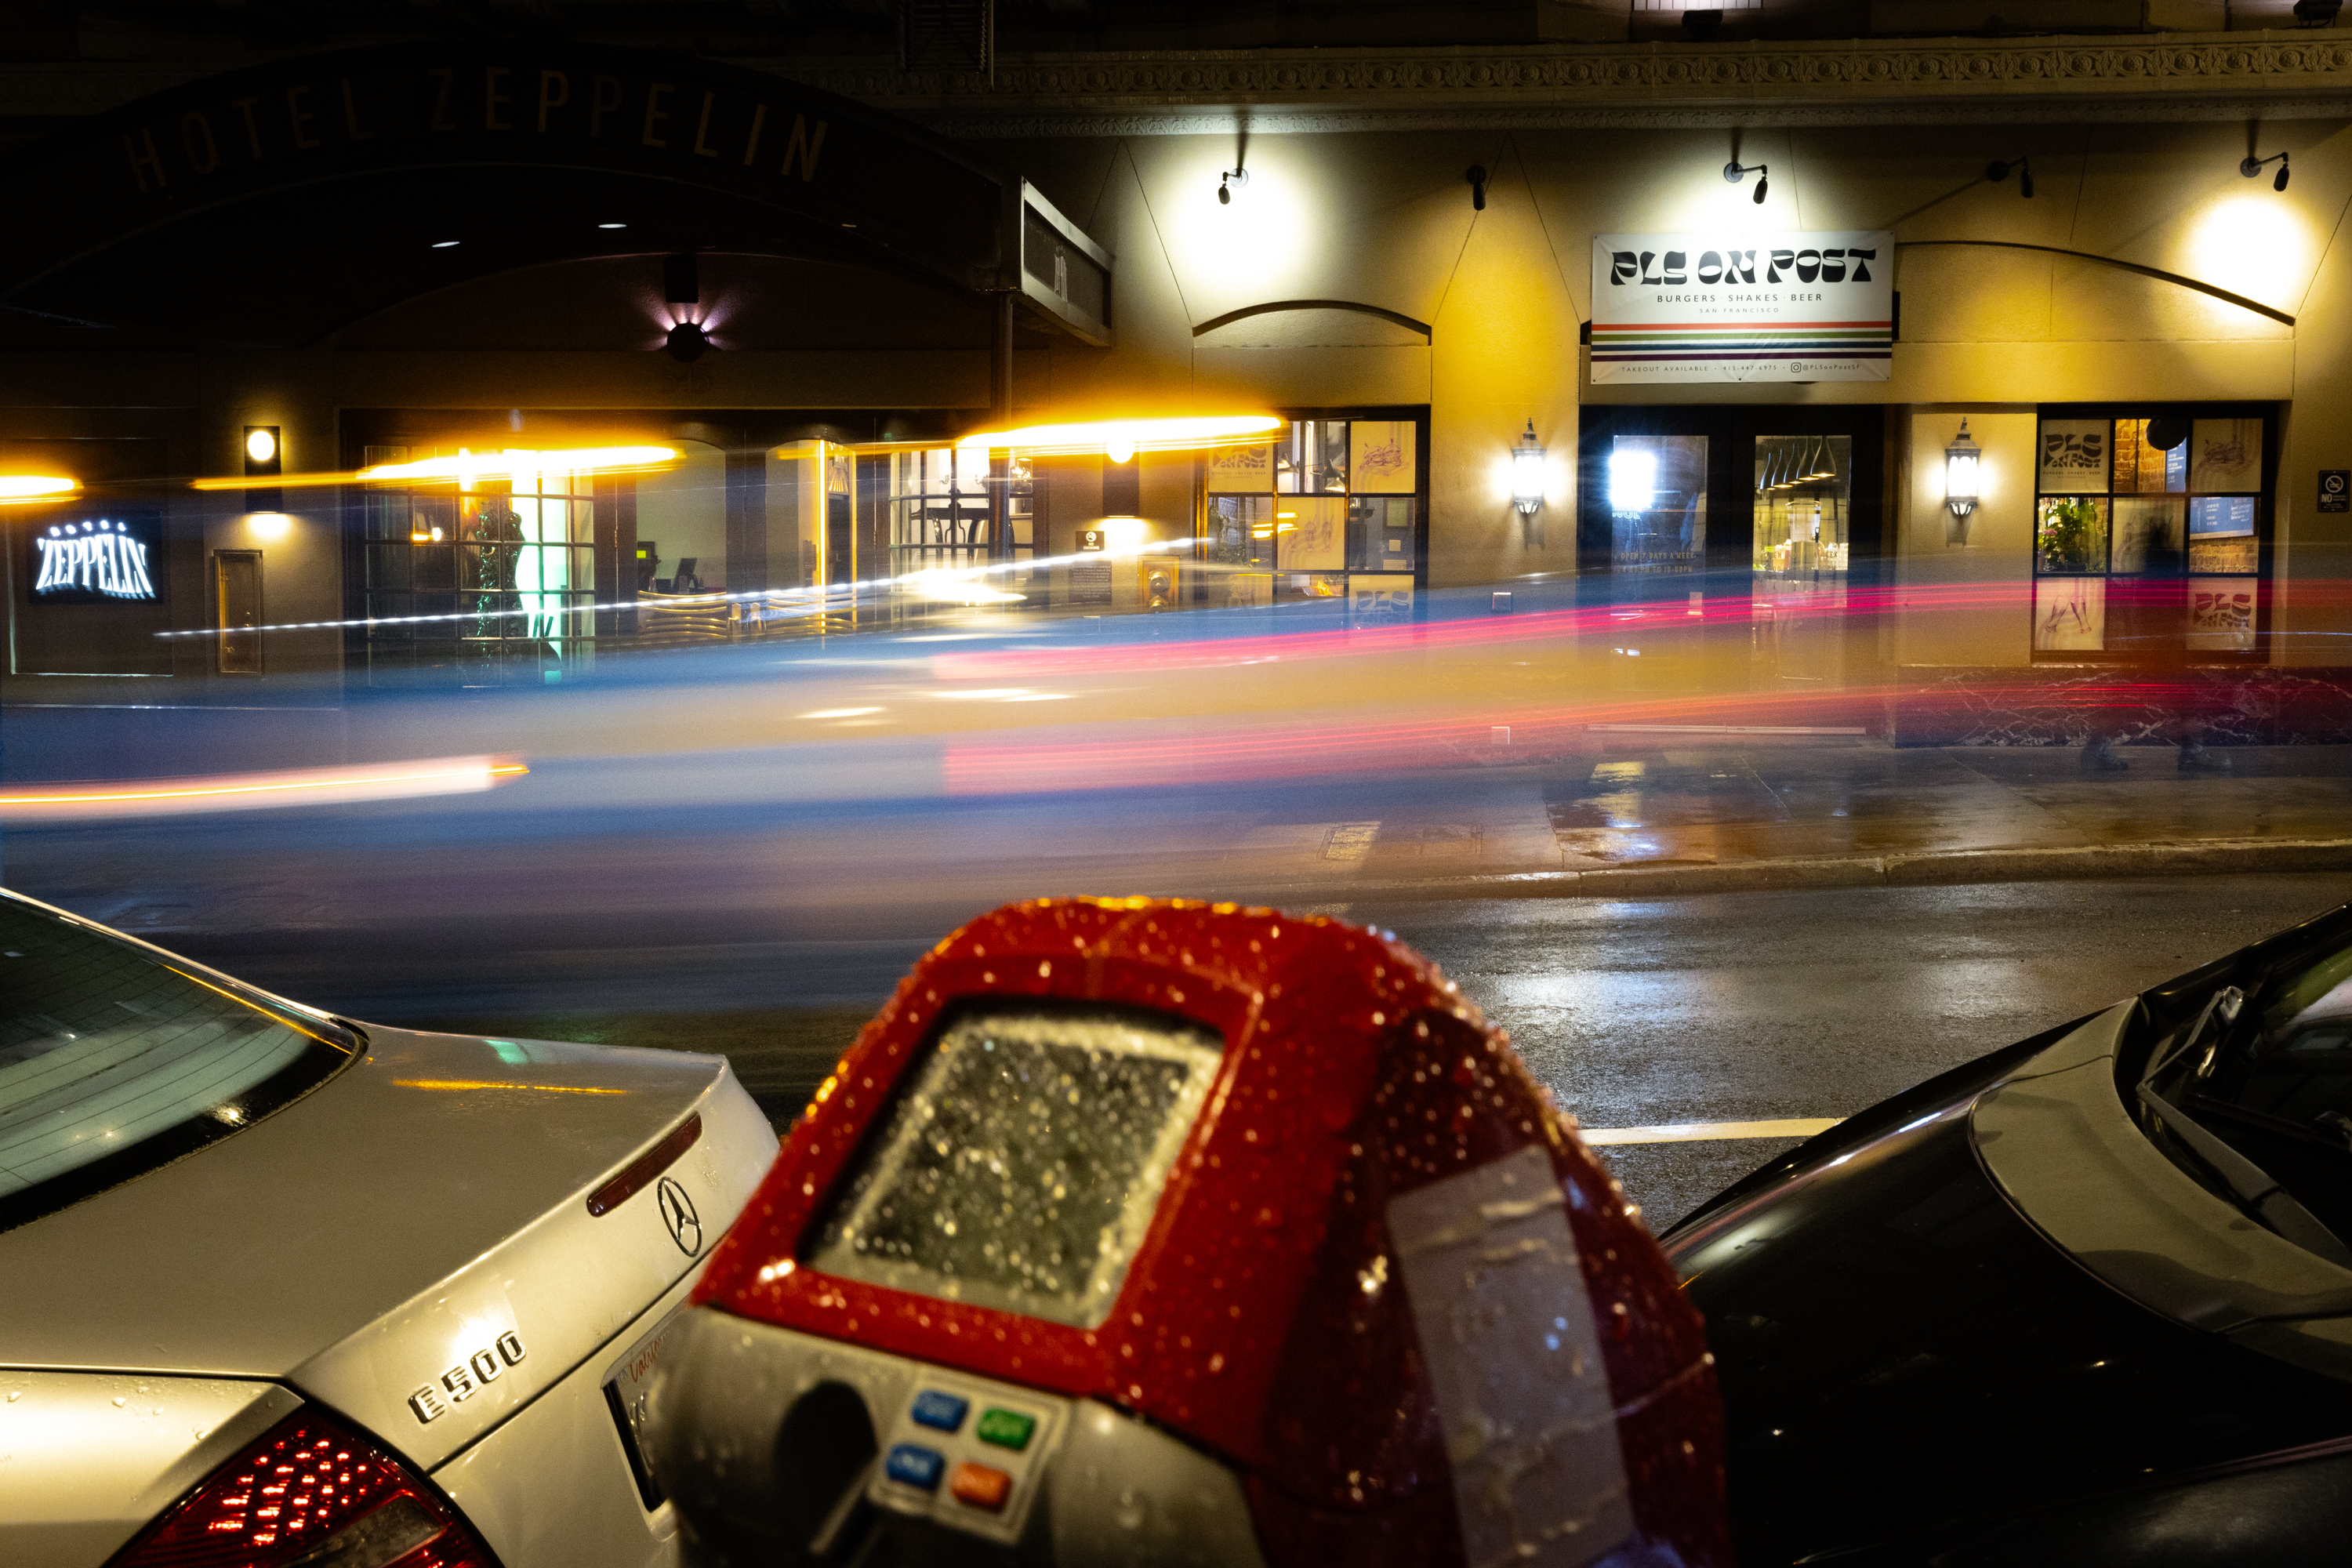 A nighttime street scene with a light trail blur from a moving vehicle, a wet parking meter, and parked cars in front of a building.